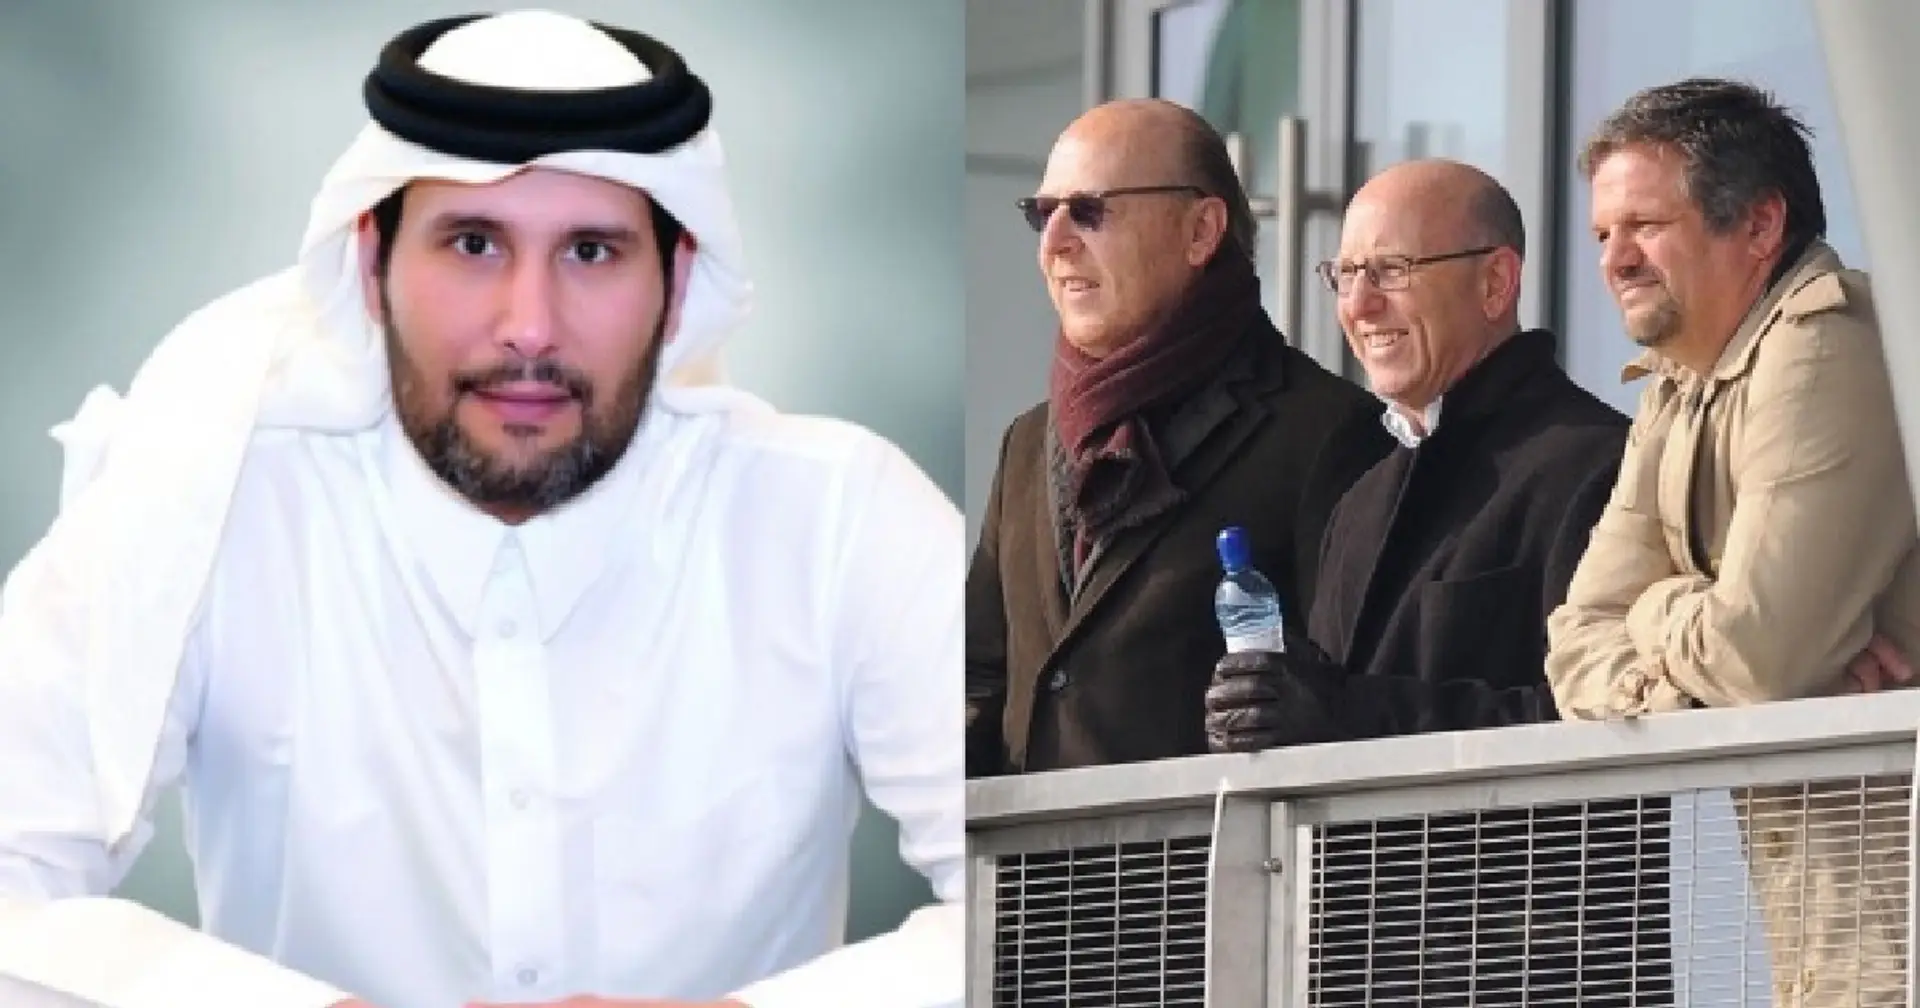 REVEALED: 3 high-profile Man United figures Sheikh Jassim could potentially fire - one is a club legend 